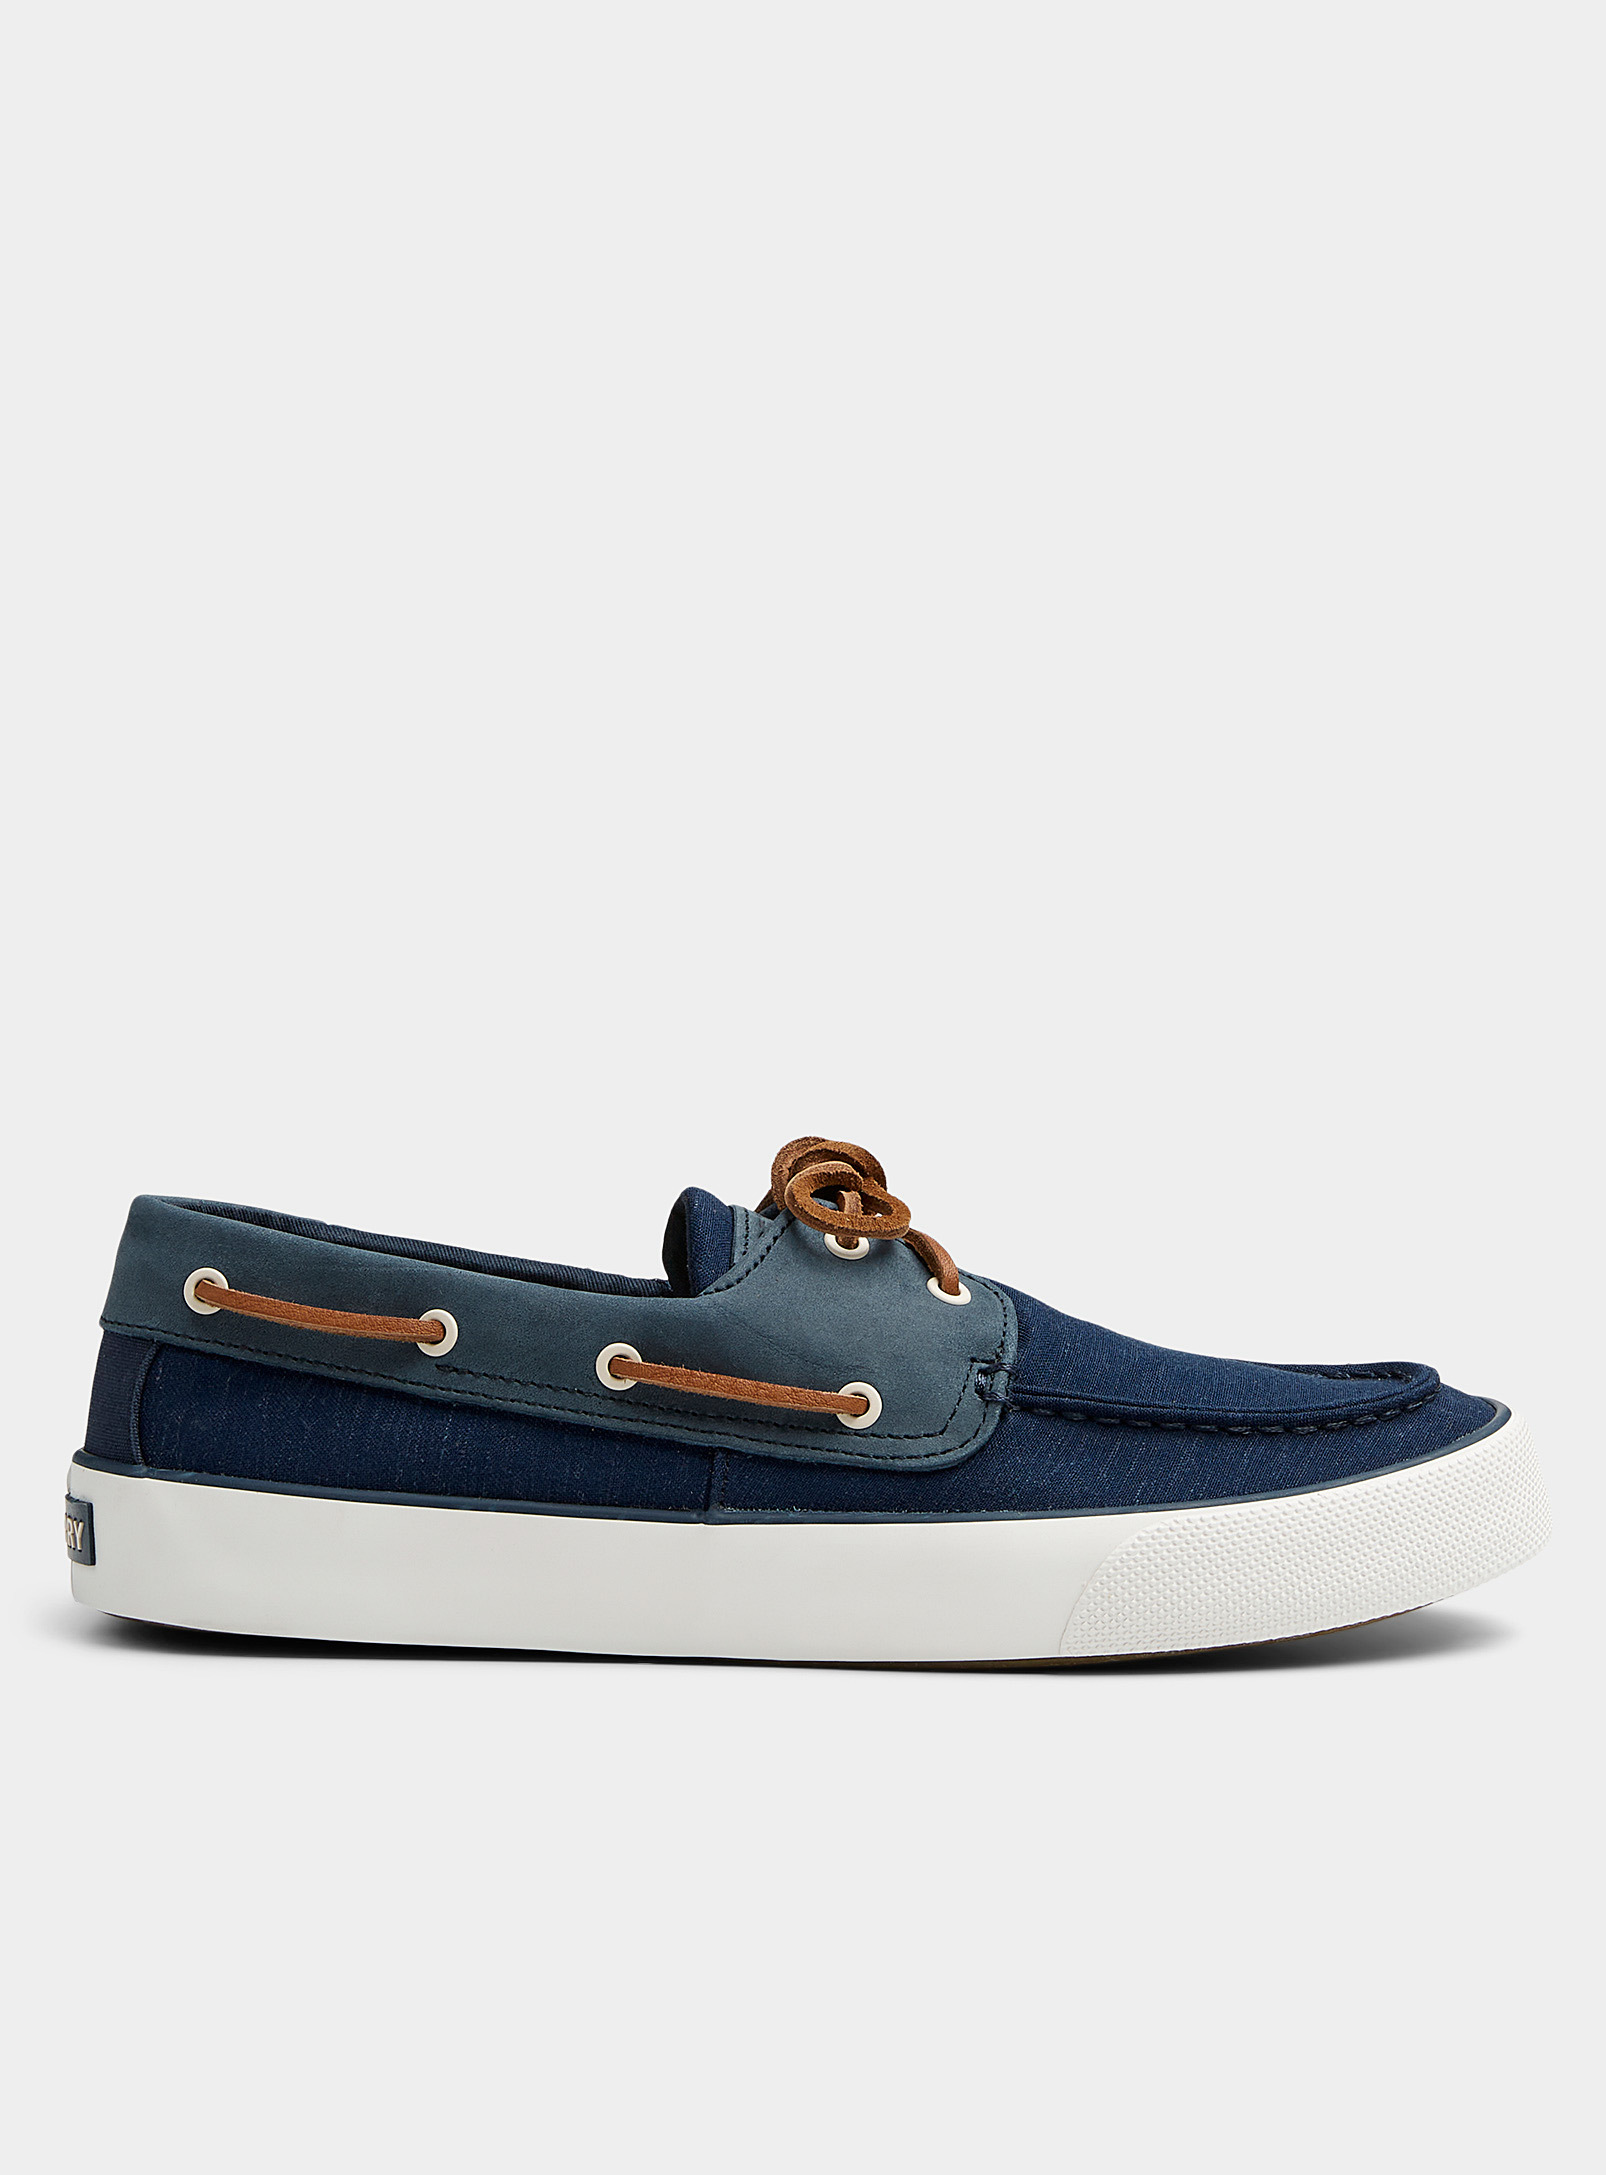 Chaussures ' Sperry Top Sider - La chaussure bateau Bahama II lin marine Homme